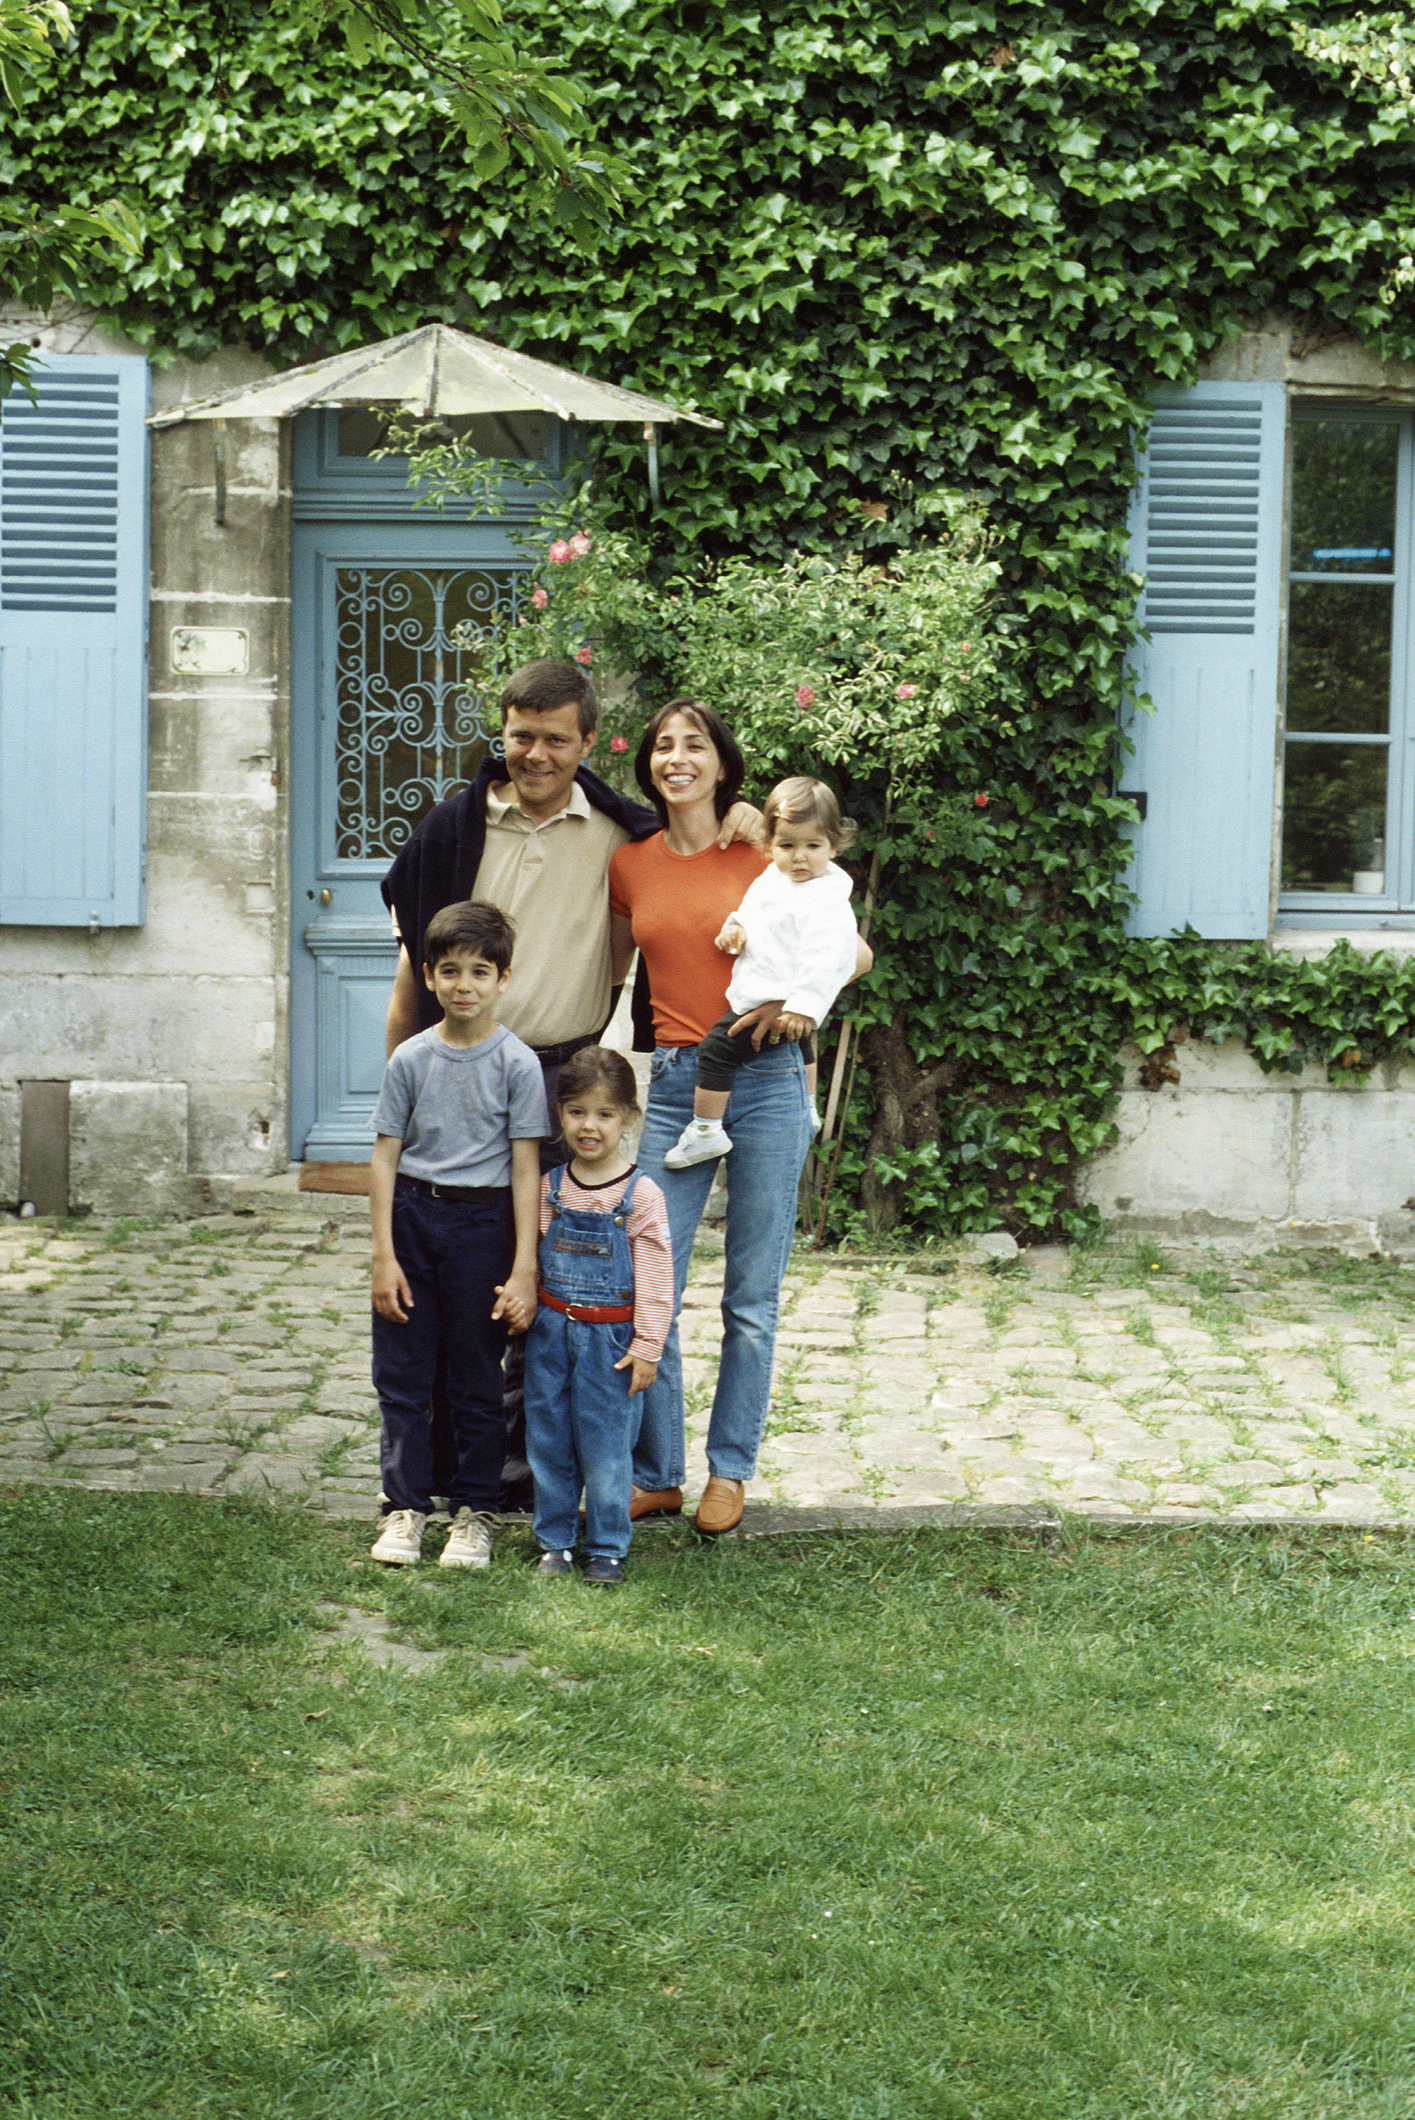 Family happily posing together in front of a house